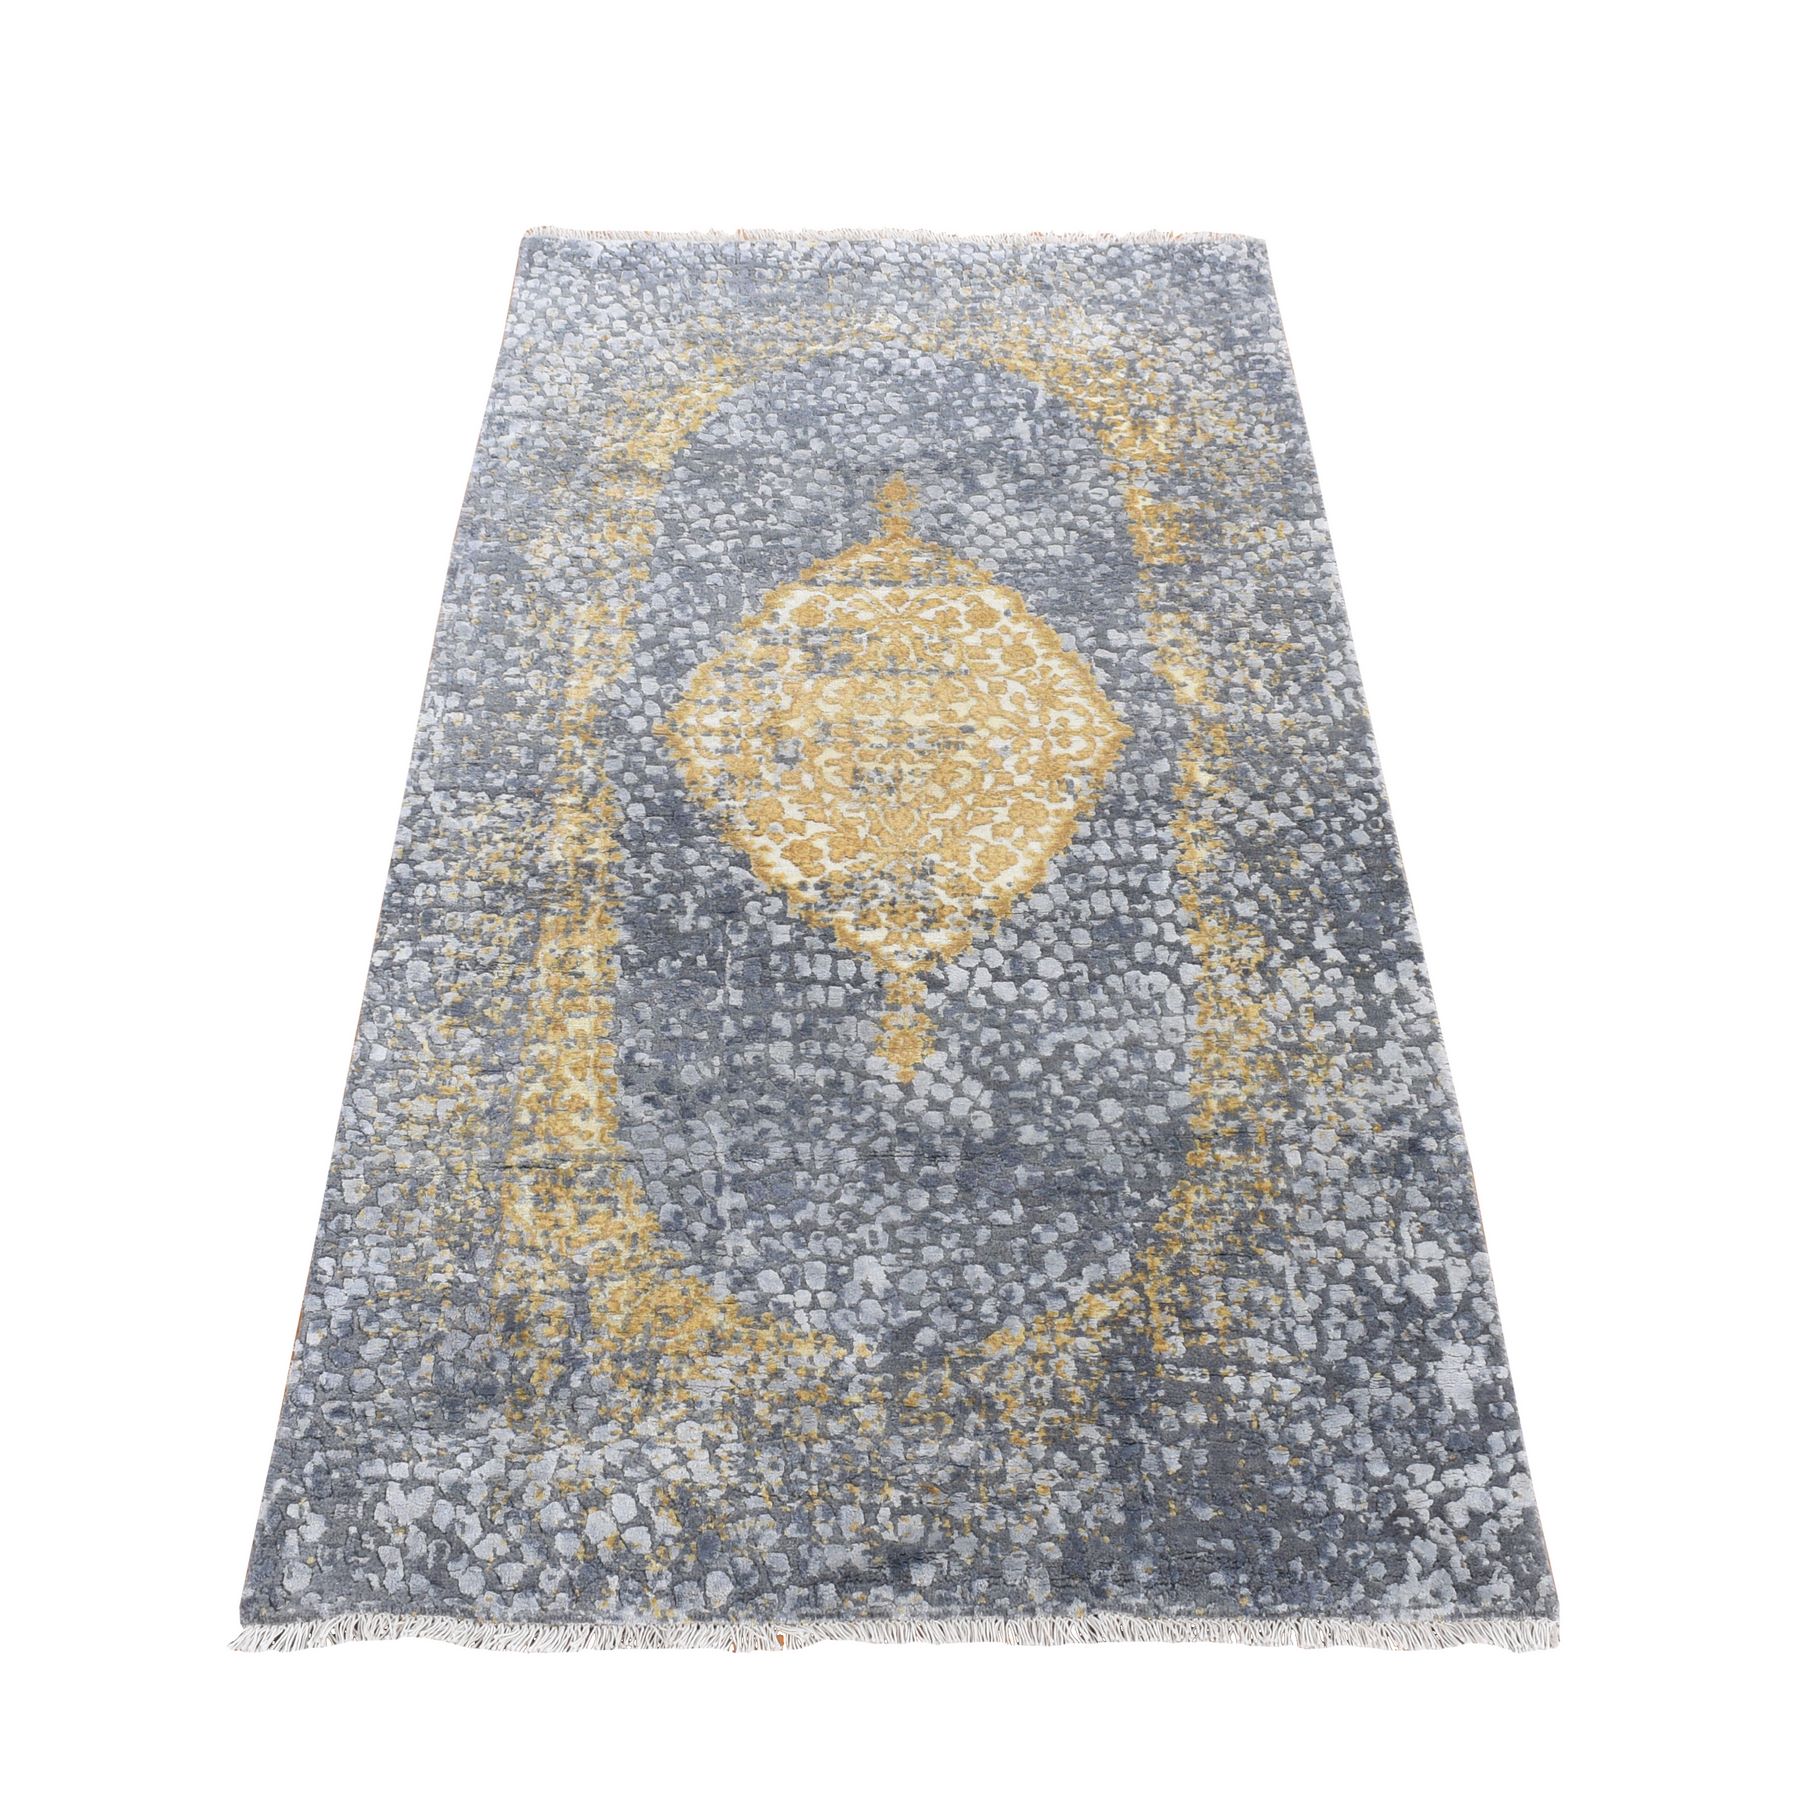  Silk Hand-Knotted Area Rug 2'10